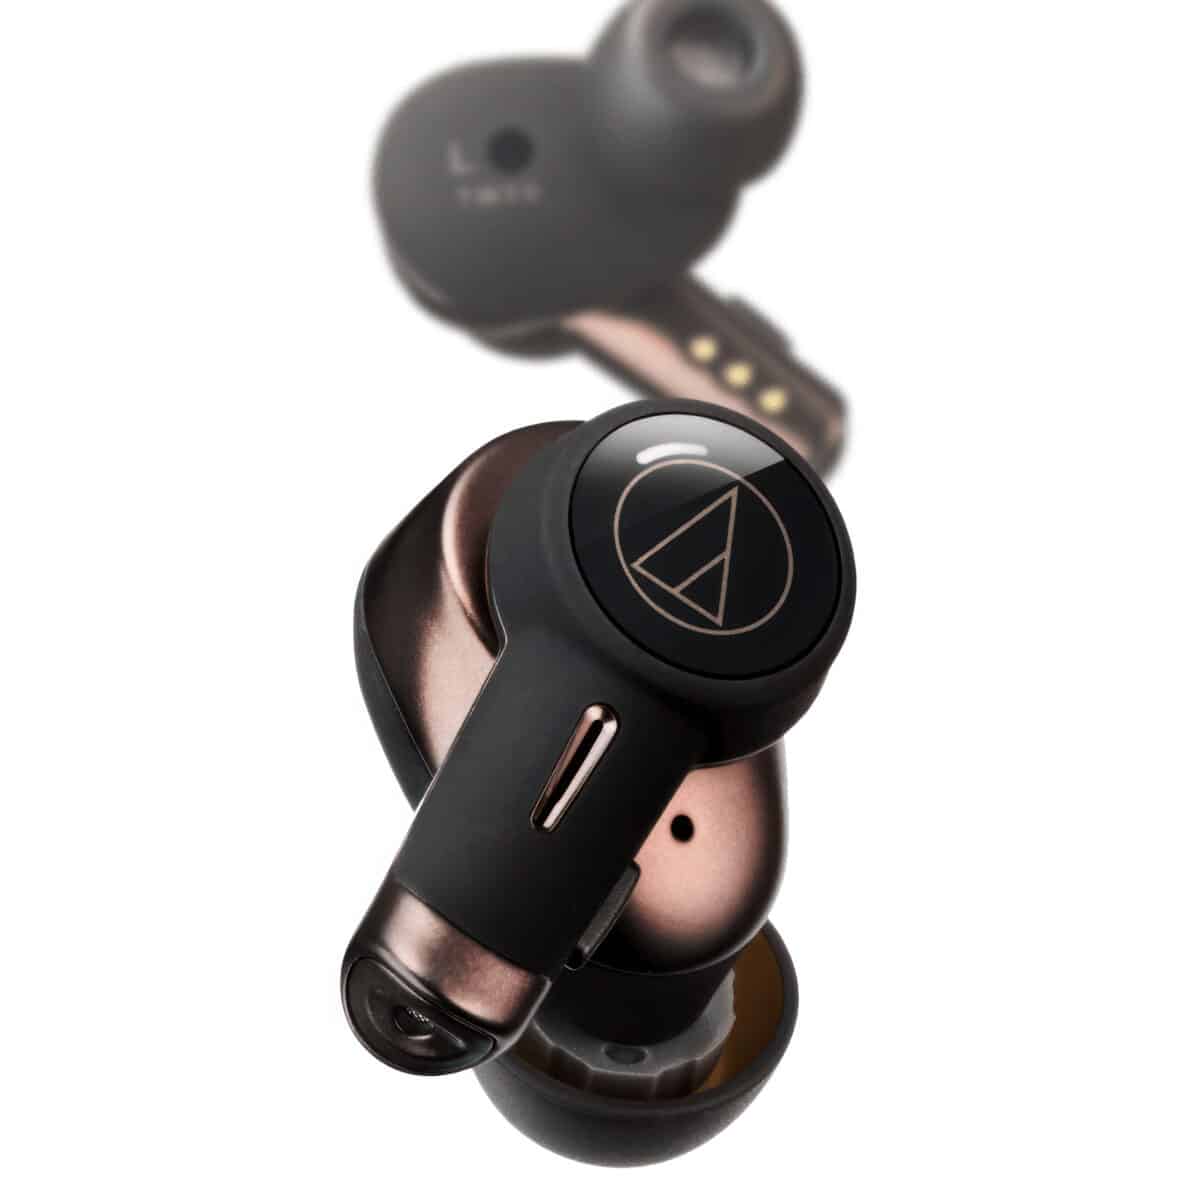 Audio Technica ATH-TWX9 earbuds